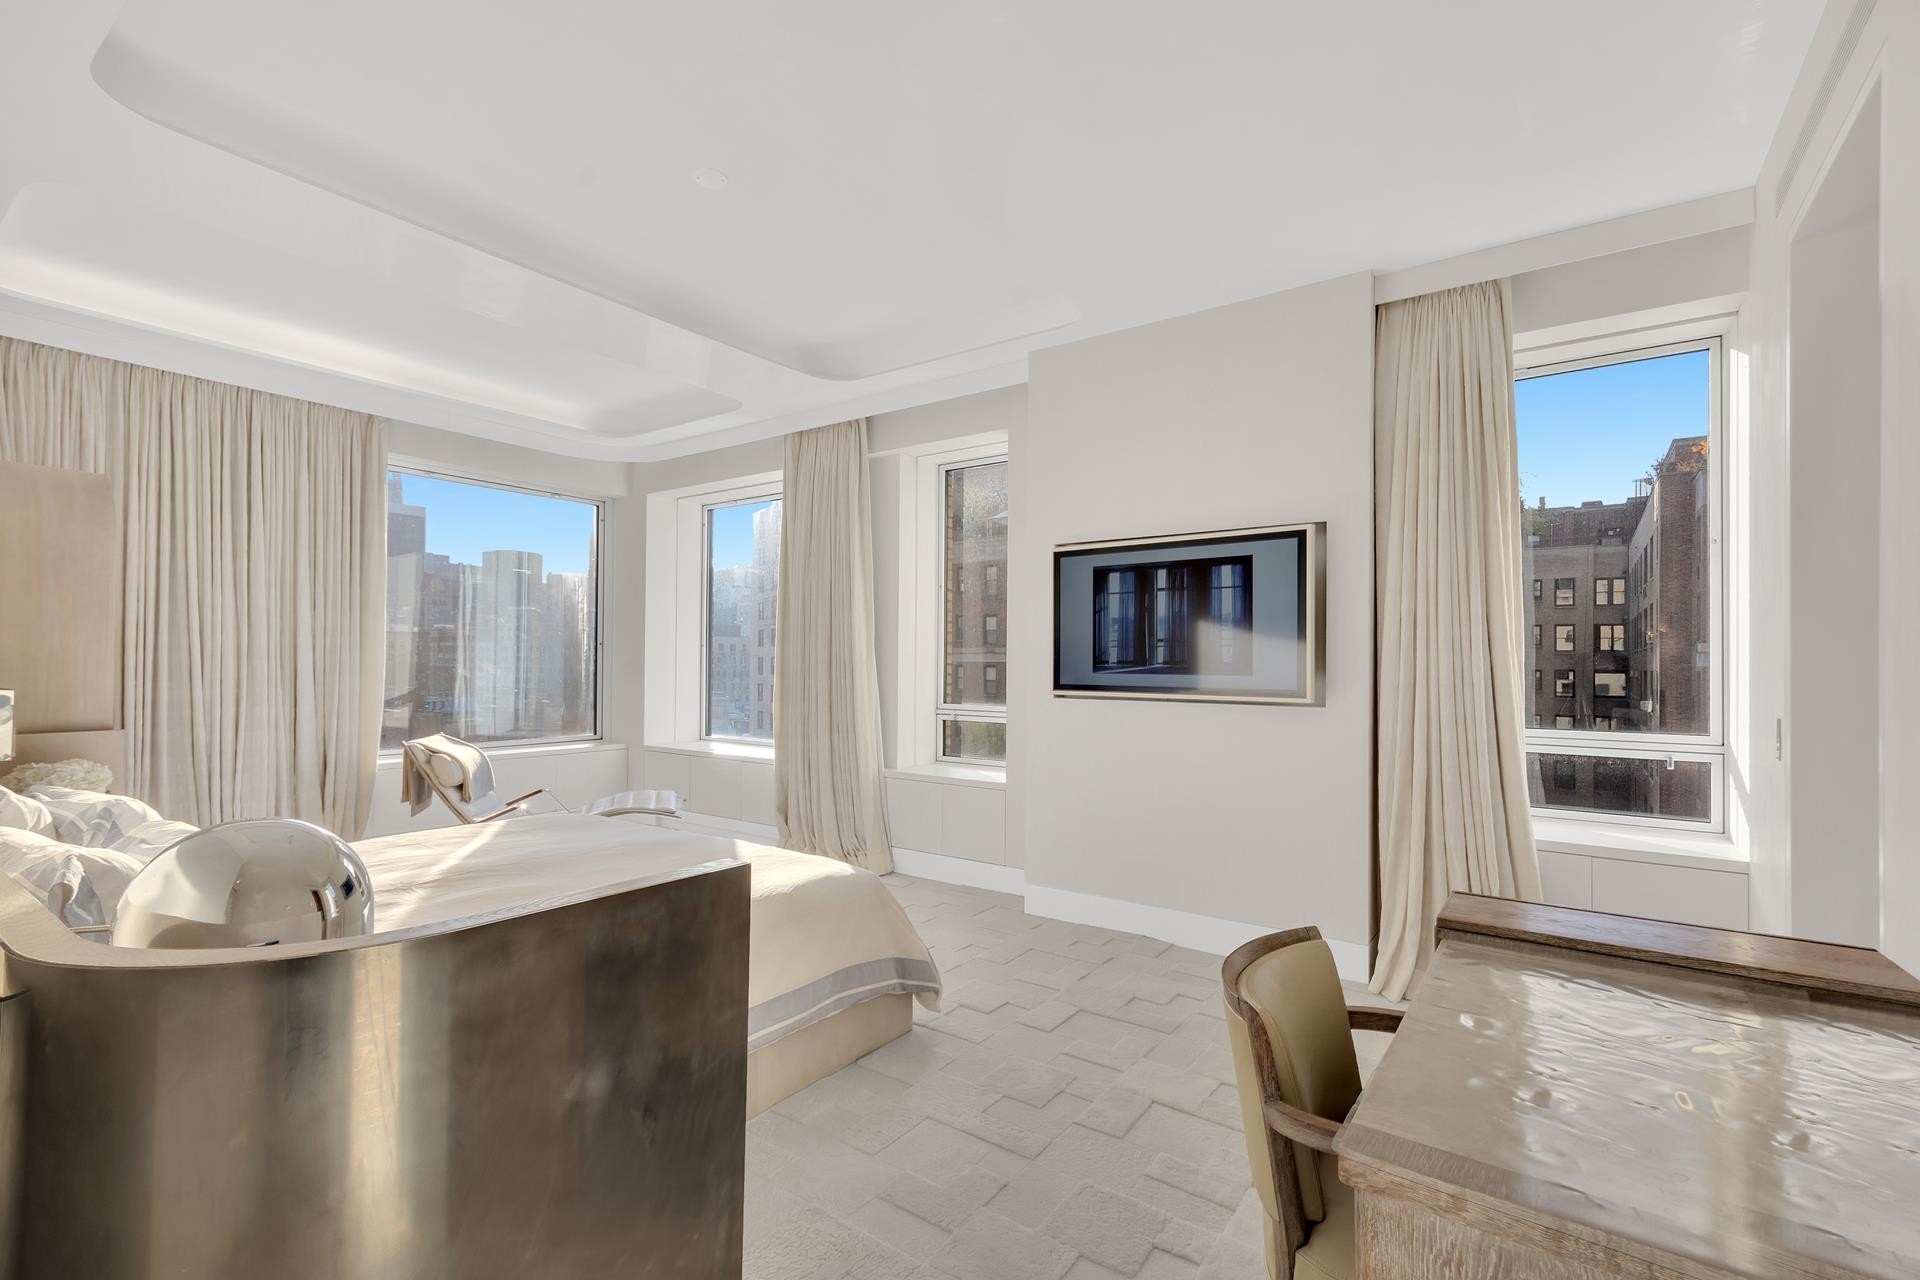 10. Co-op Properties for Sale at 730 PARK AVE, 10/11C Lenox Hill, New York, New York 10021